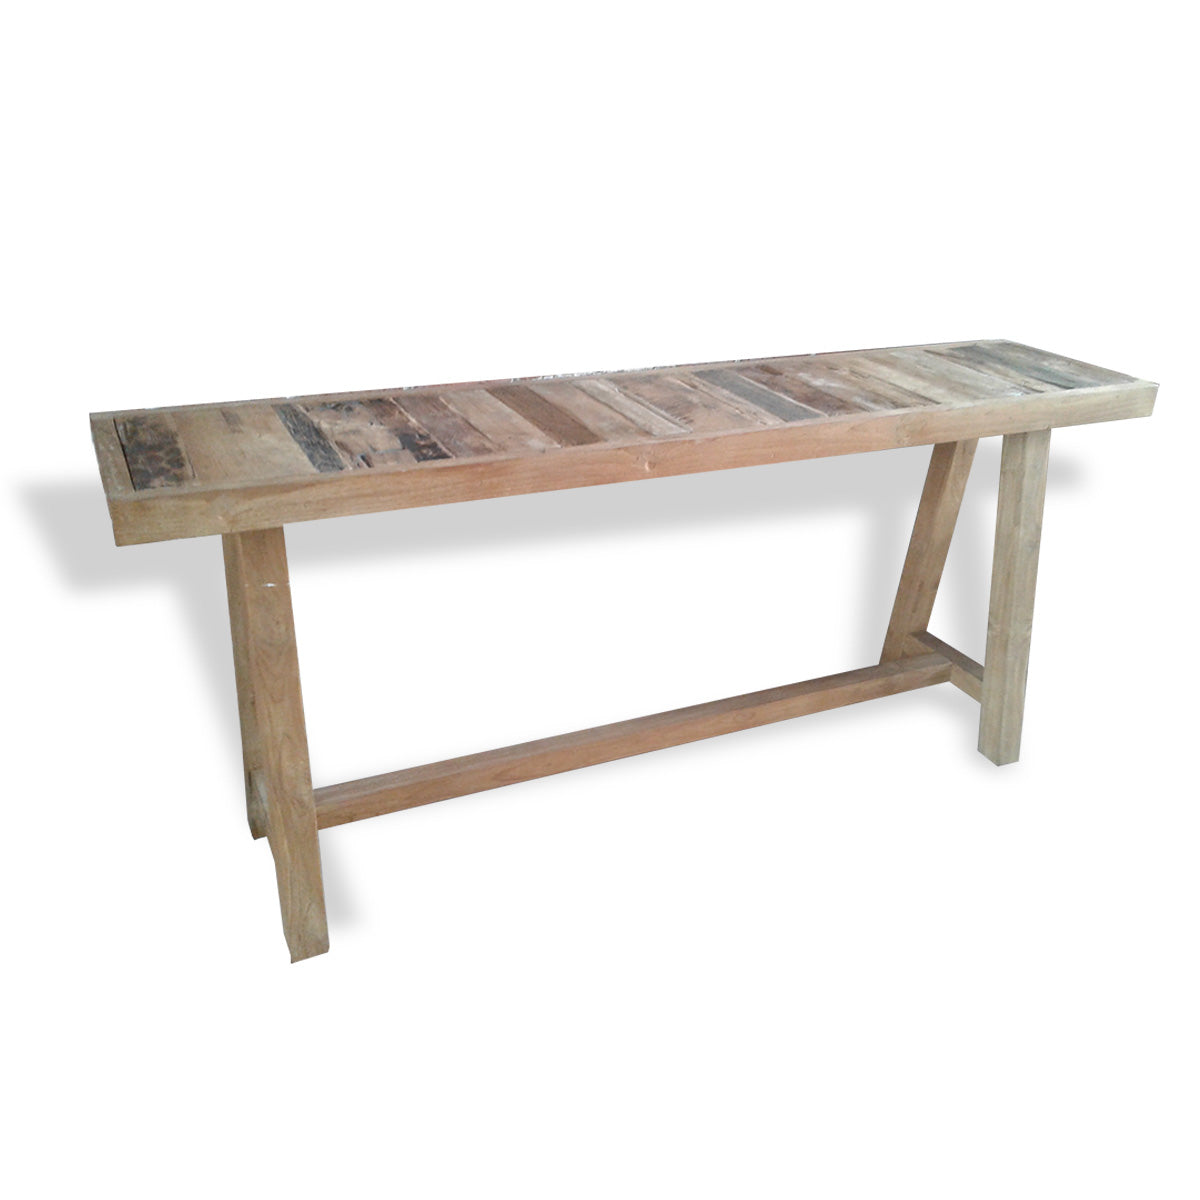 LOF015 NATURAL RECYCLED TEAK WOOD RUSTIC CONSOLE